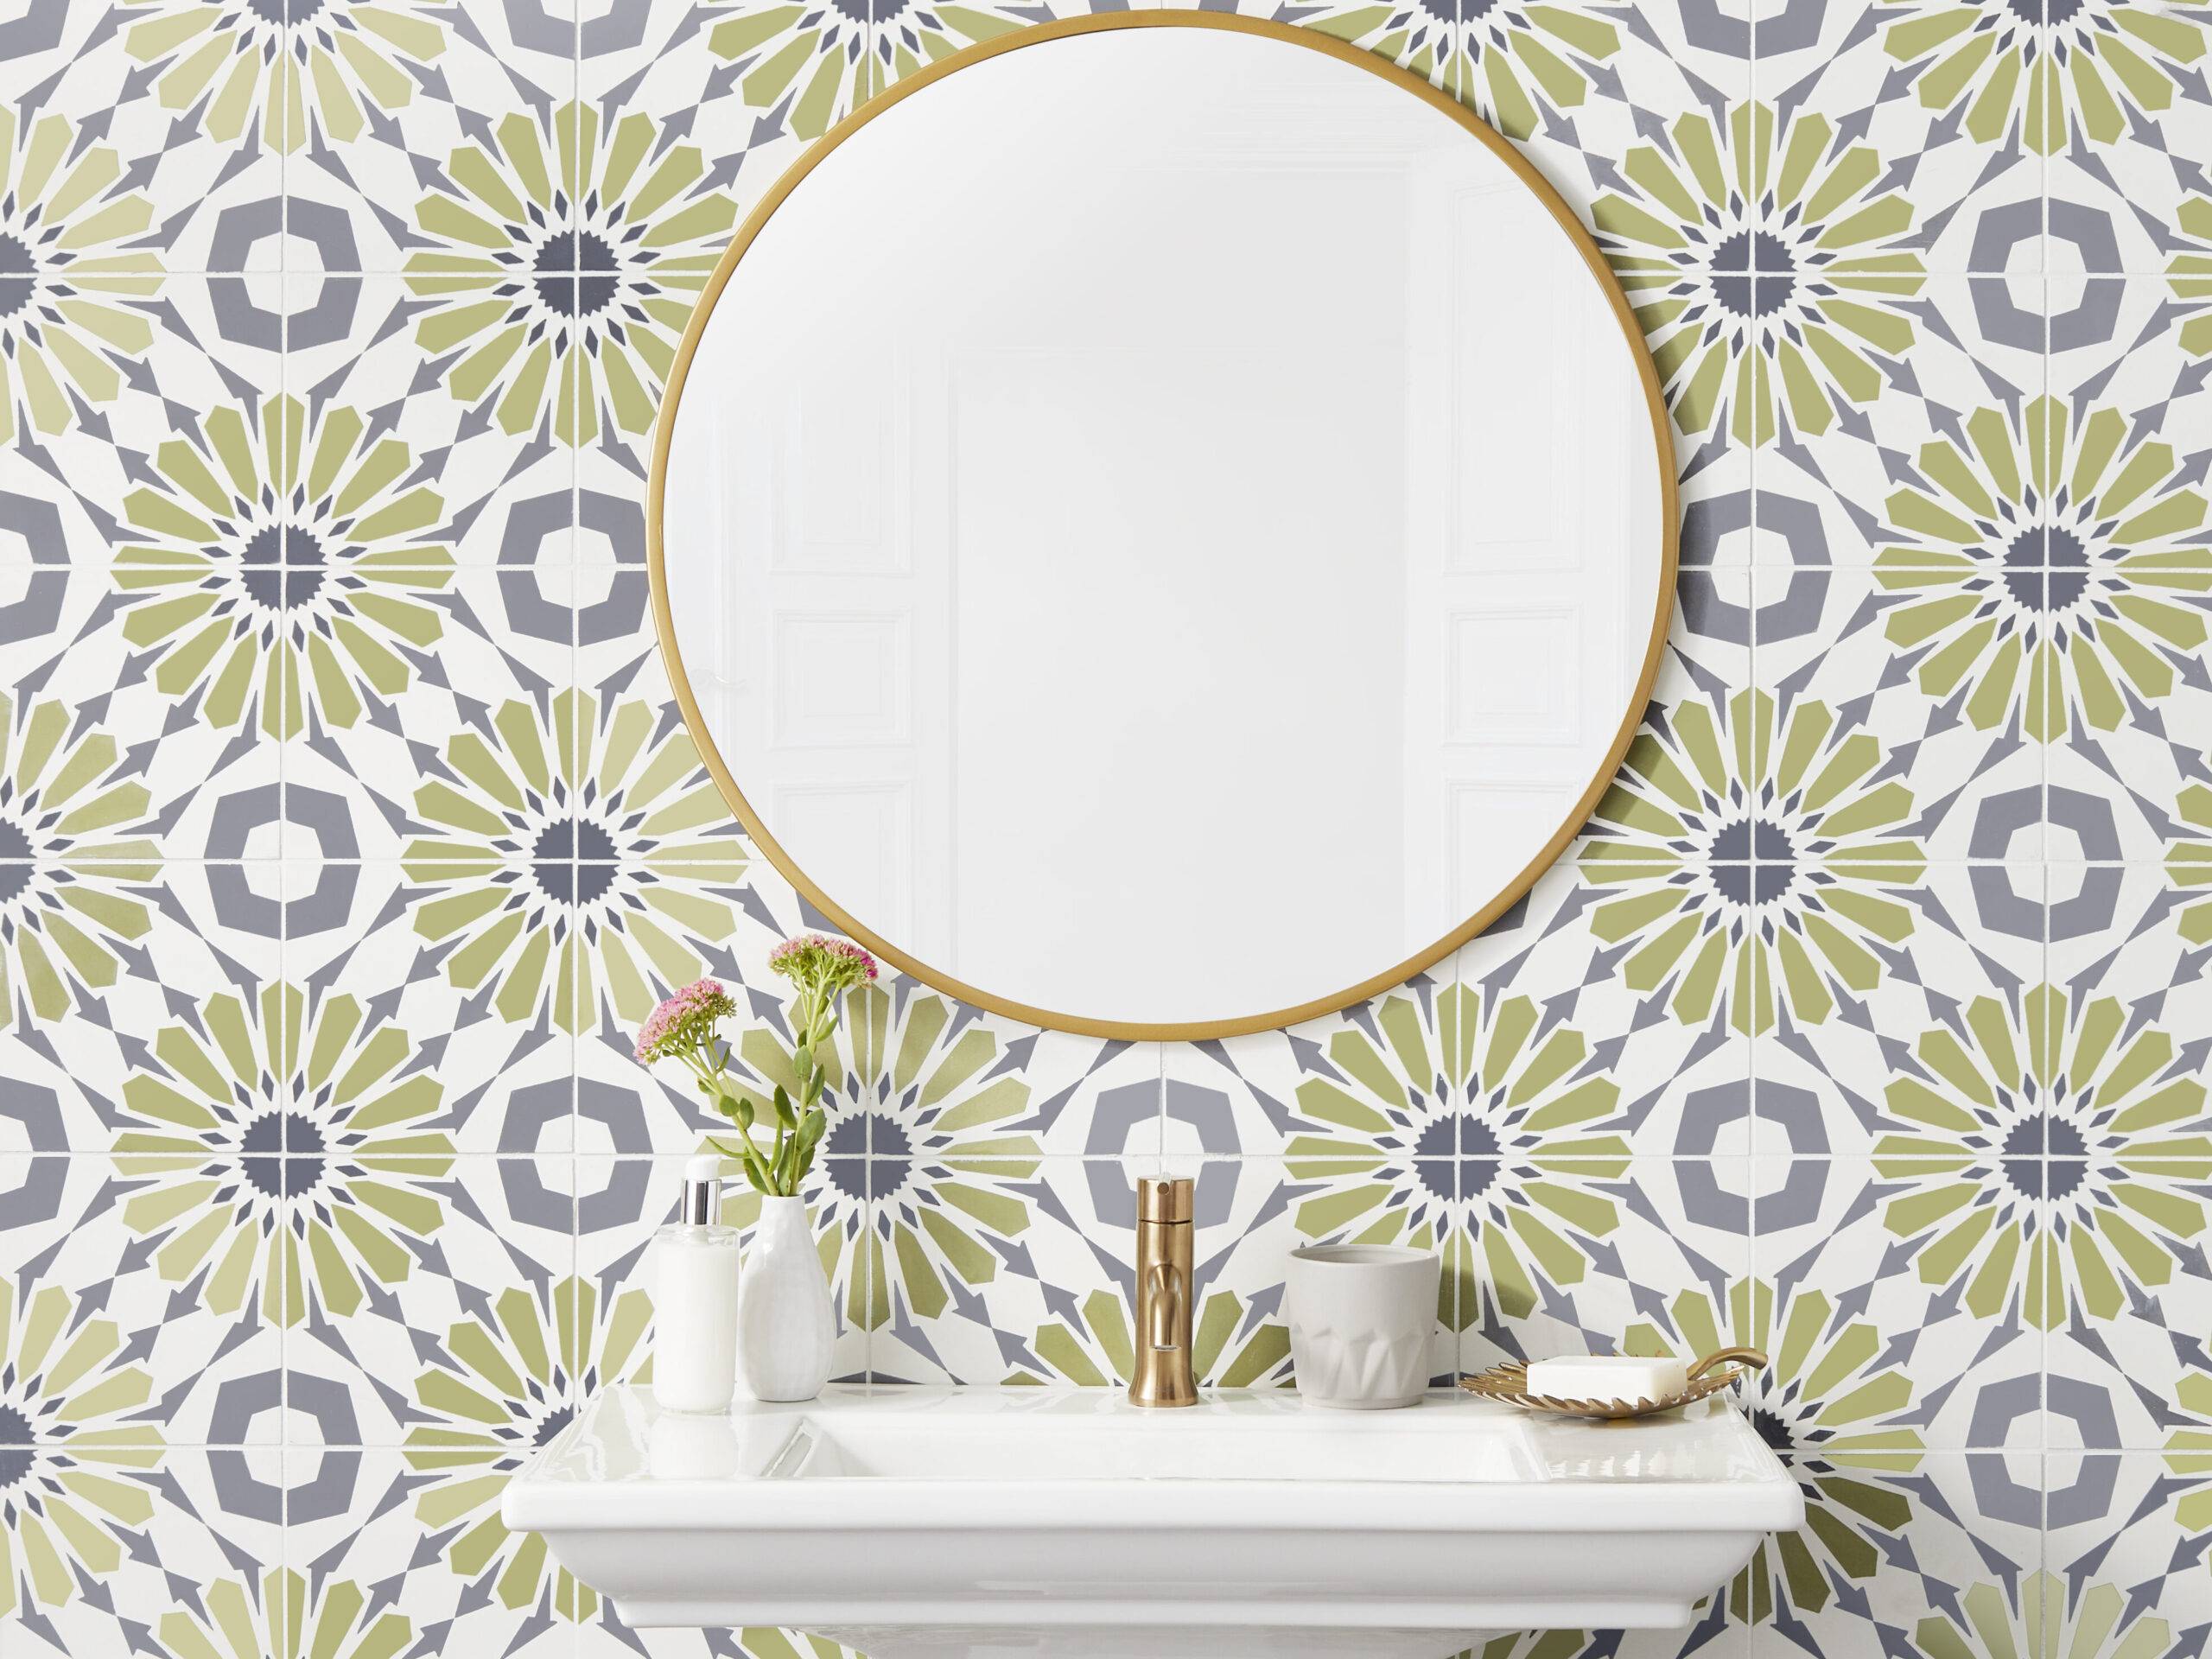 This 8" x 8" encaustic tile design uses a series of angular shapes to create a pattern that resembles a flower petal or starburst. Used behind this white vessel sink and mirror as a feature wall.  